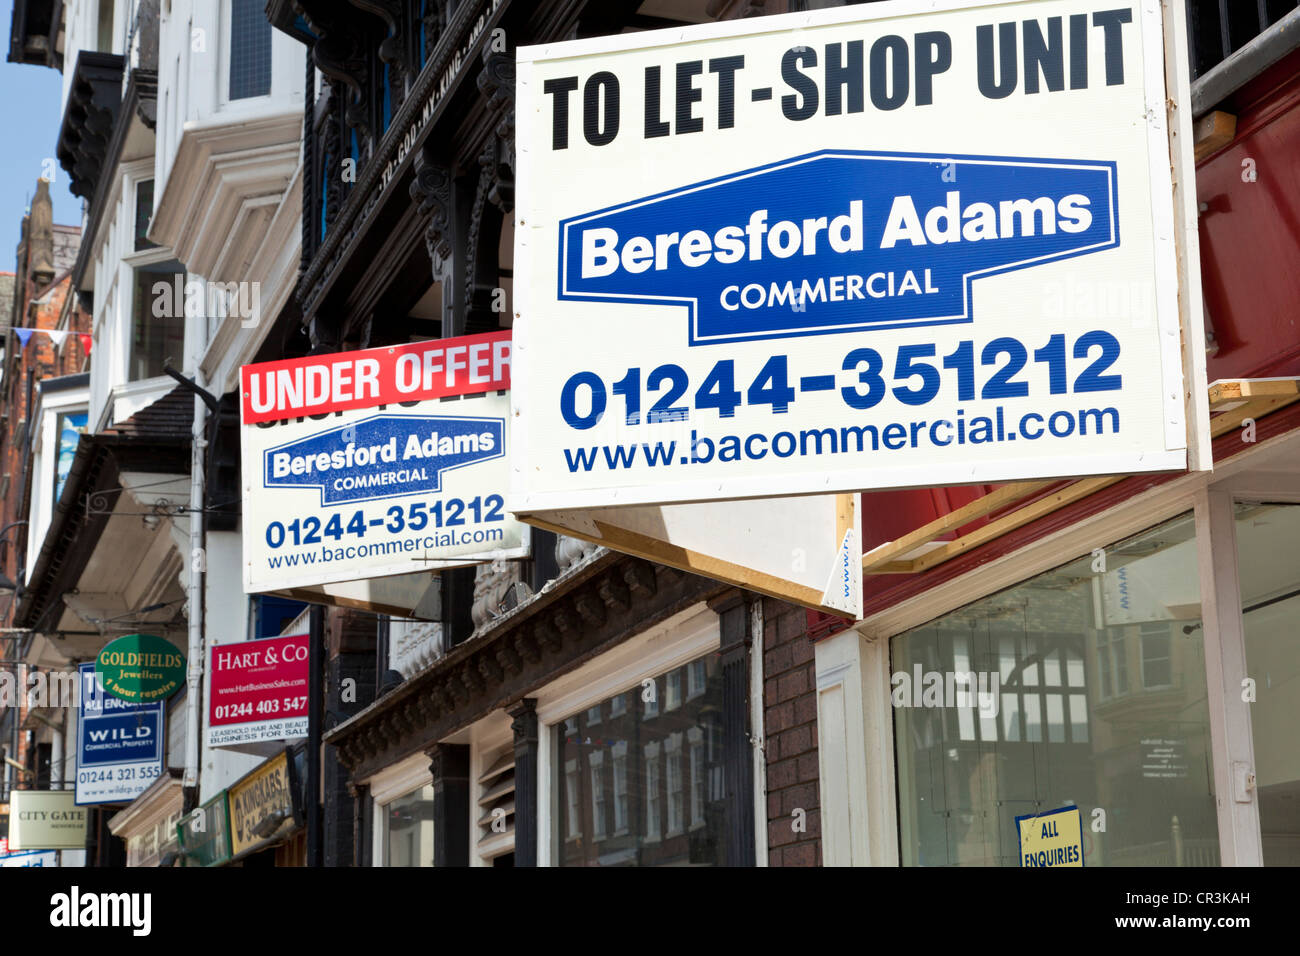 Shop to let signs in Chester city centre Cheshire England UK GB EU Europe Stock Photo